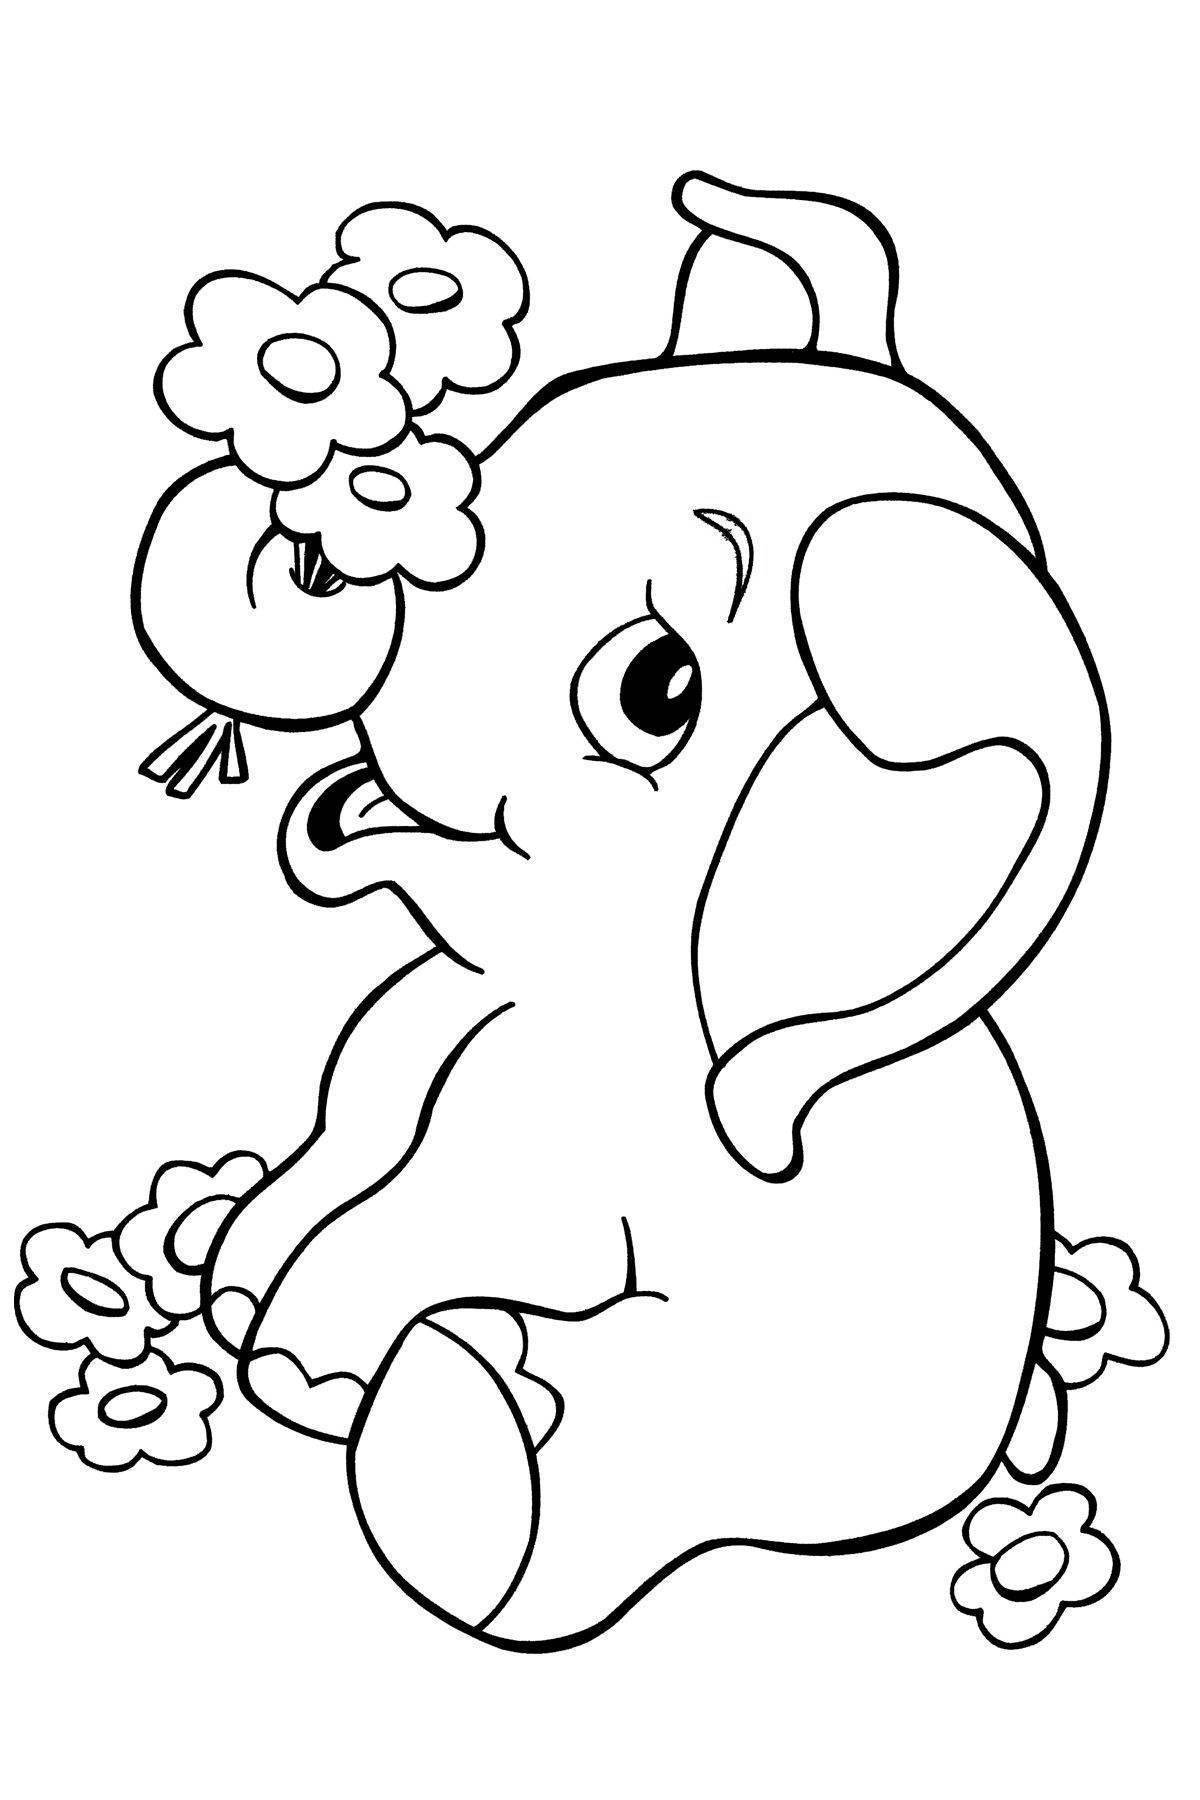 Cute animals coloring pages for kids